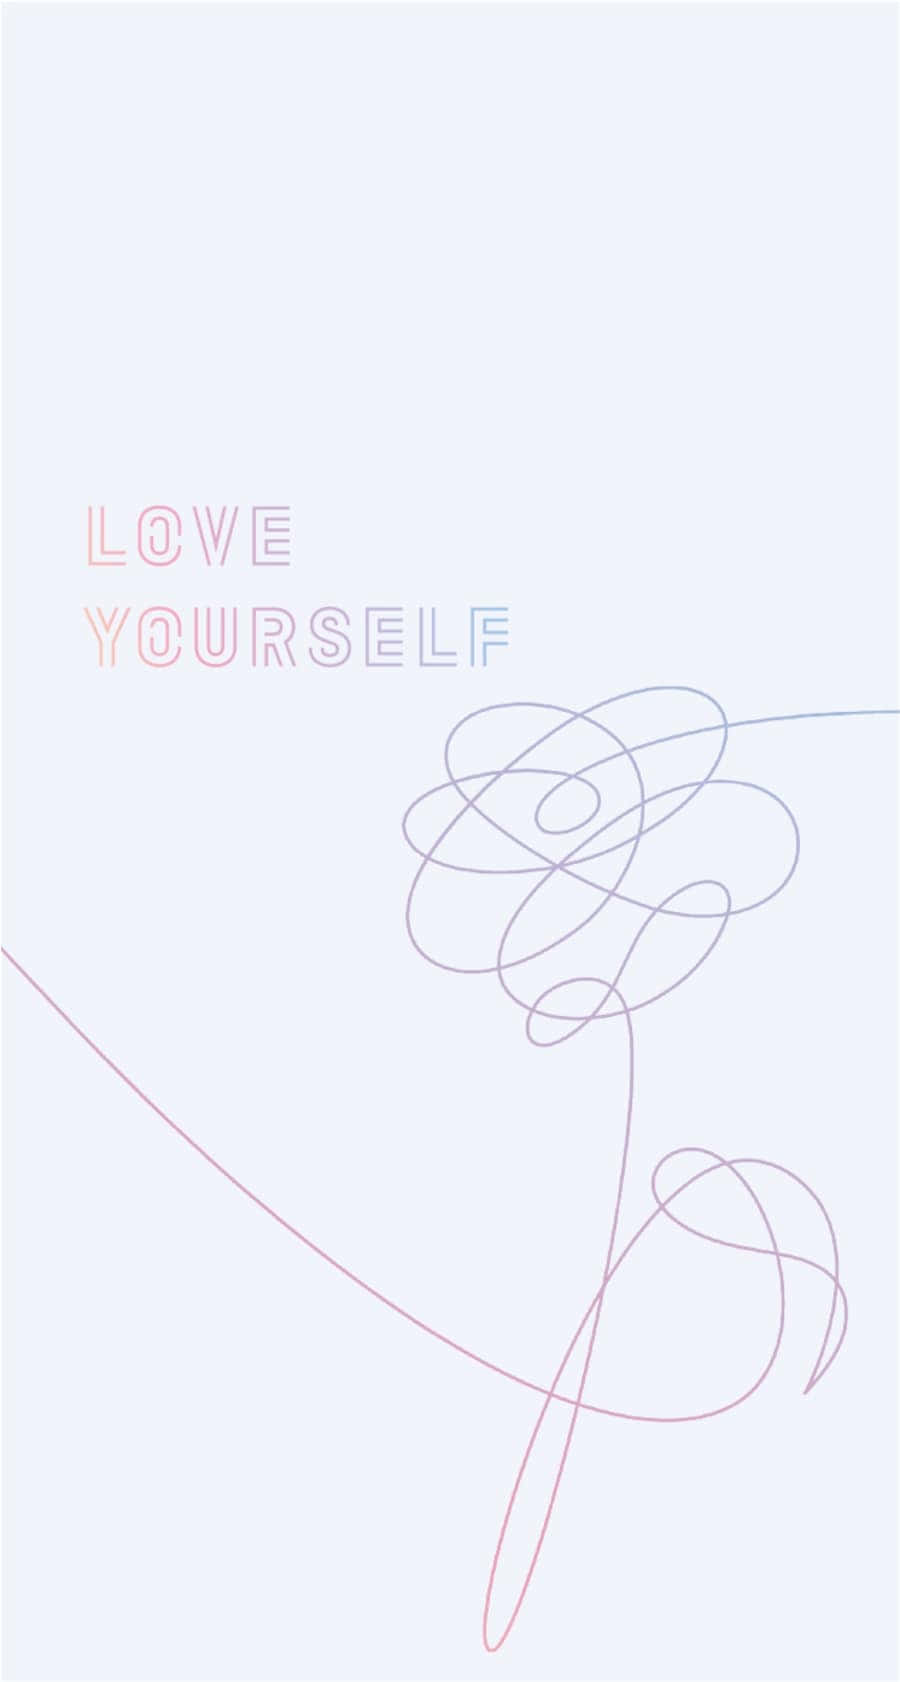 BTS Love Yourself: All Members Together Wallpaper